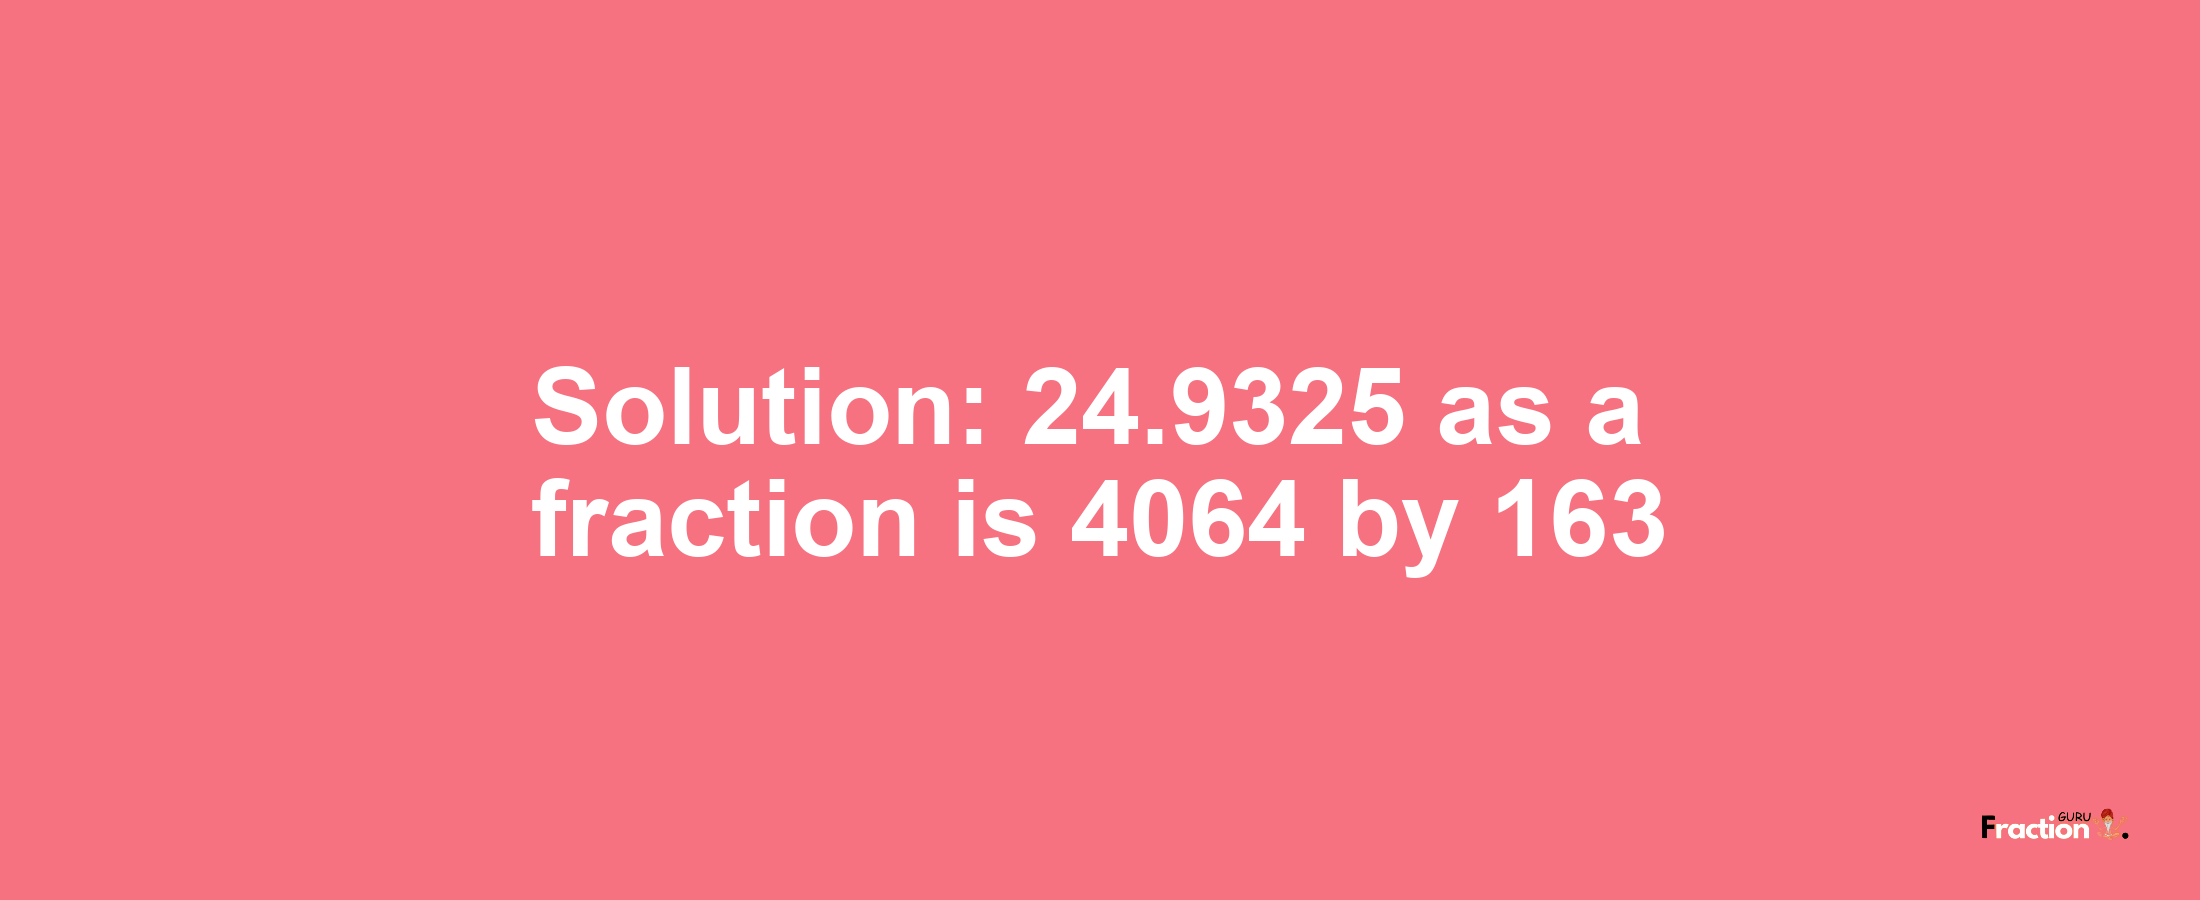 Solution:24.9325 as a fraction is 4064/163